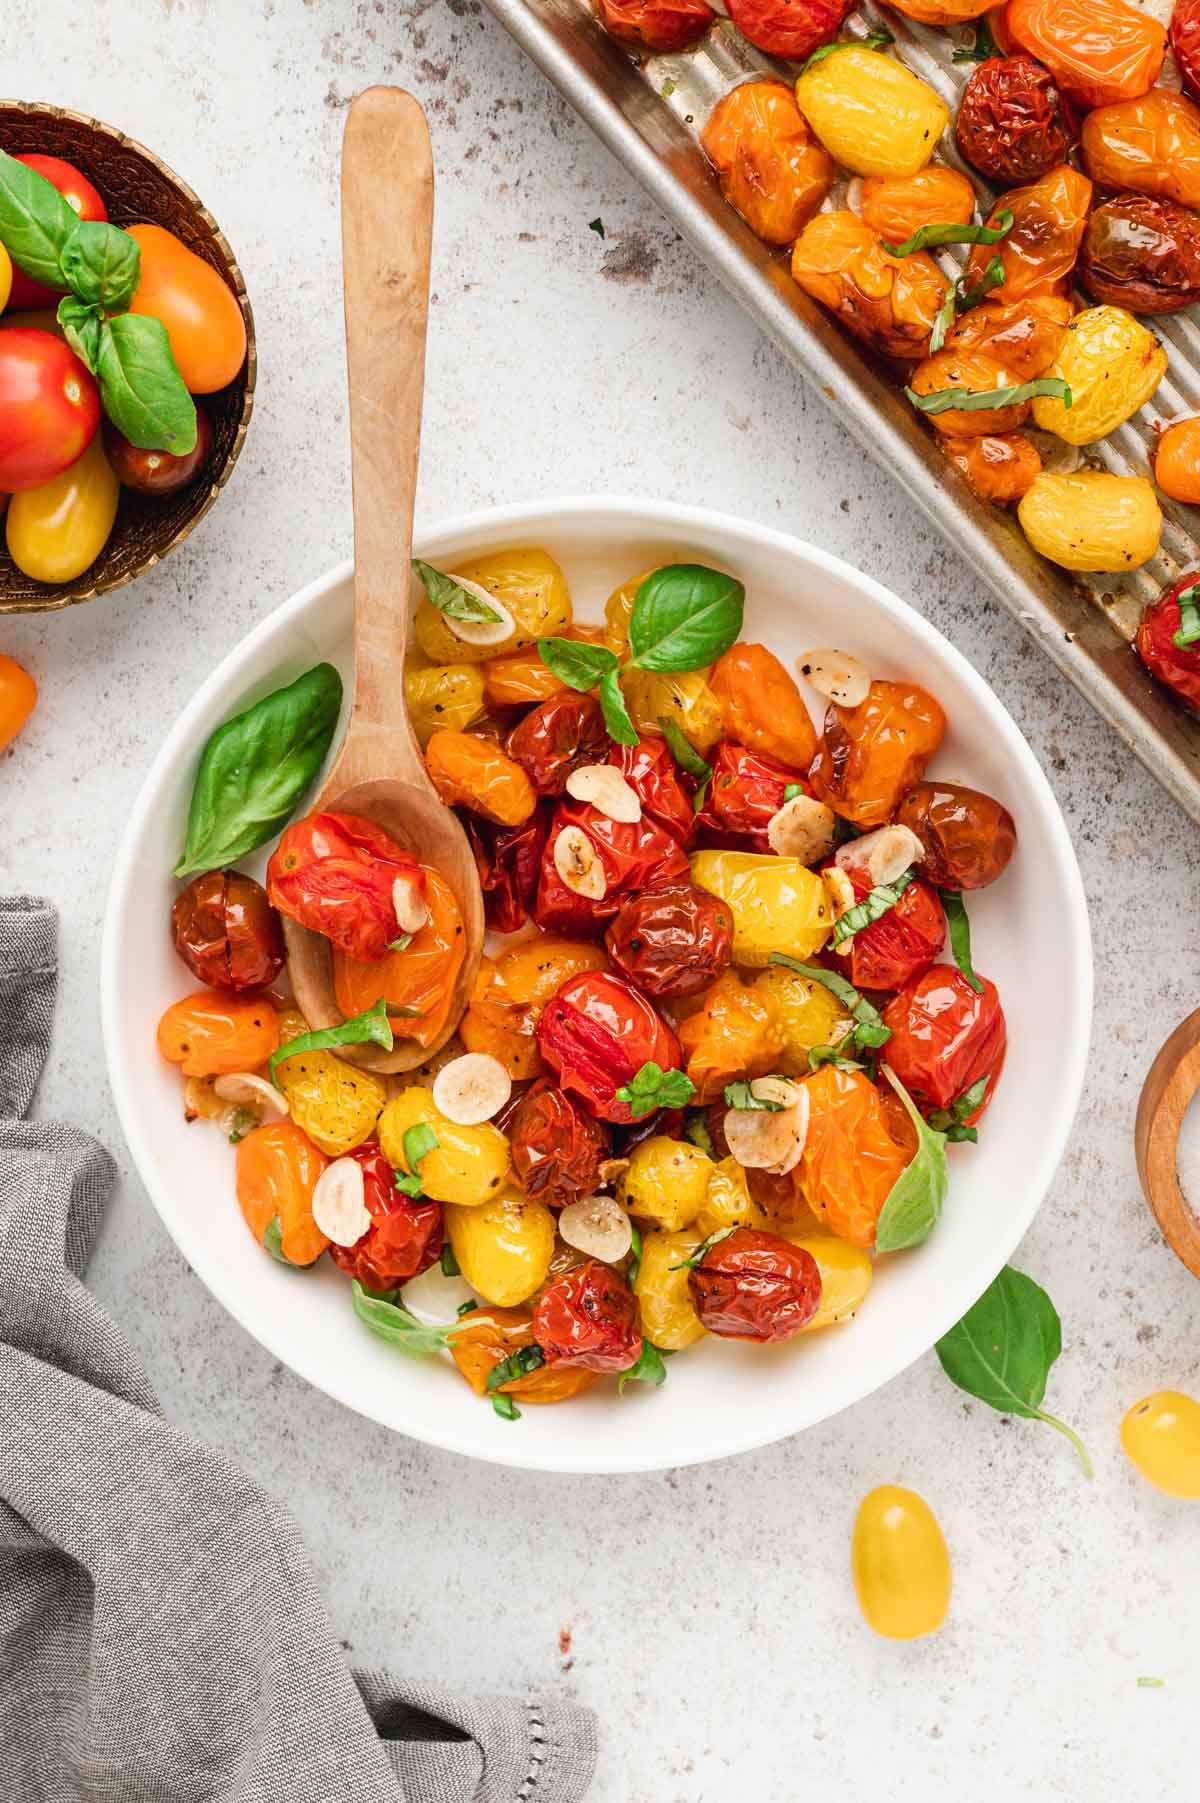 Roasted cherry tomatoes in a white bowl with fresh basil leaves and a wooden spoon.